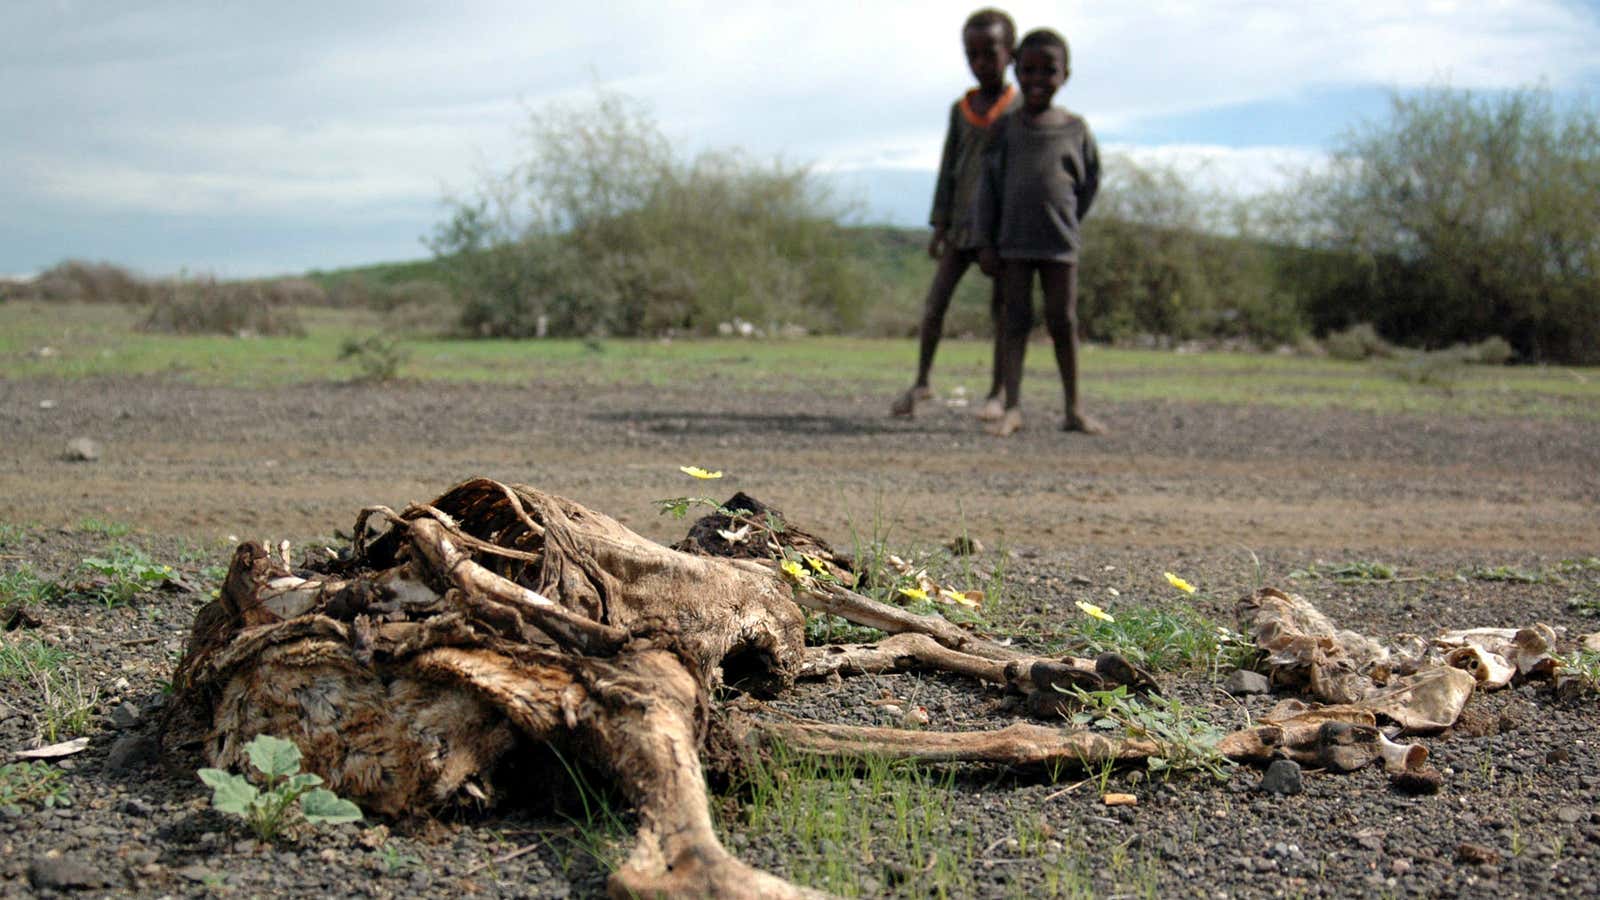 Another drought crisis has hit Ethiopia.